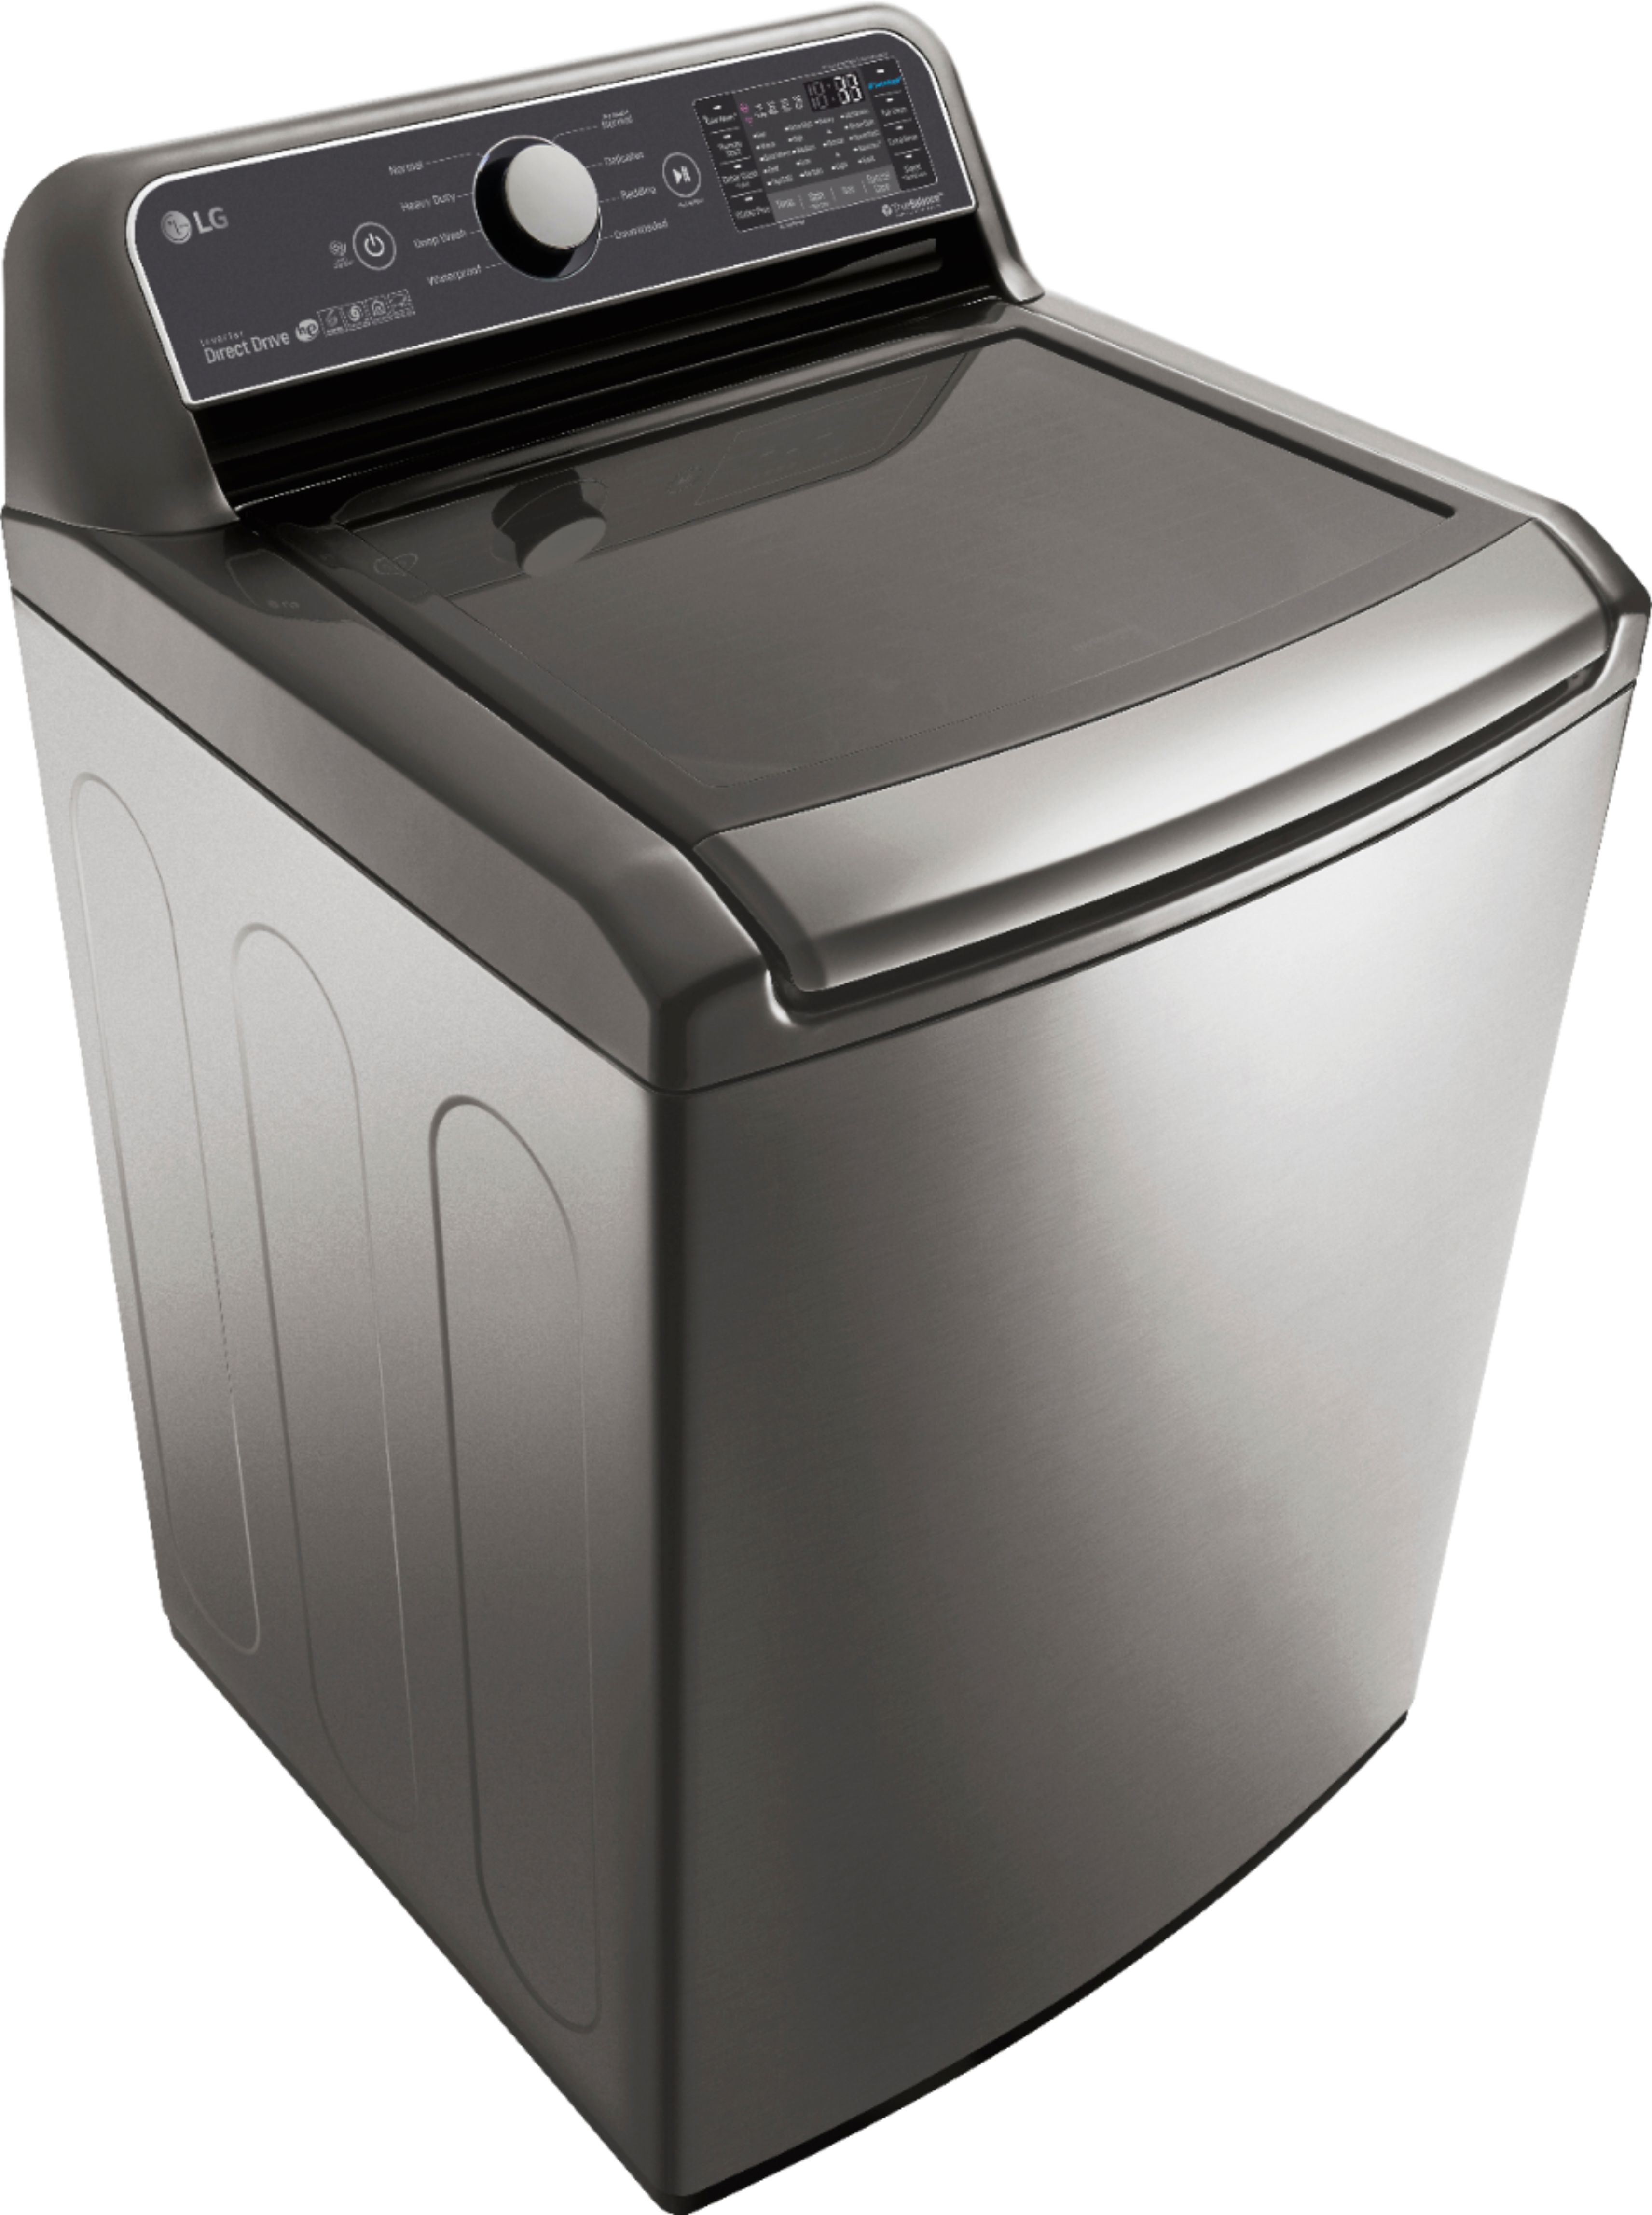 Lg 5 0 Cu Ft 8 Cycle Top Loading Washer With 6motion Technology Graphite Steel Wt7300cv Best Buy